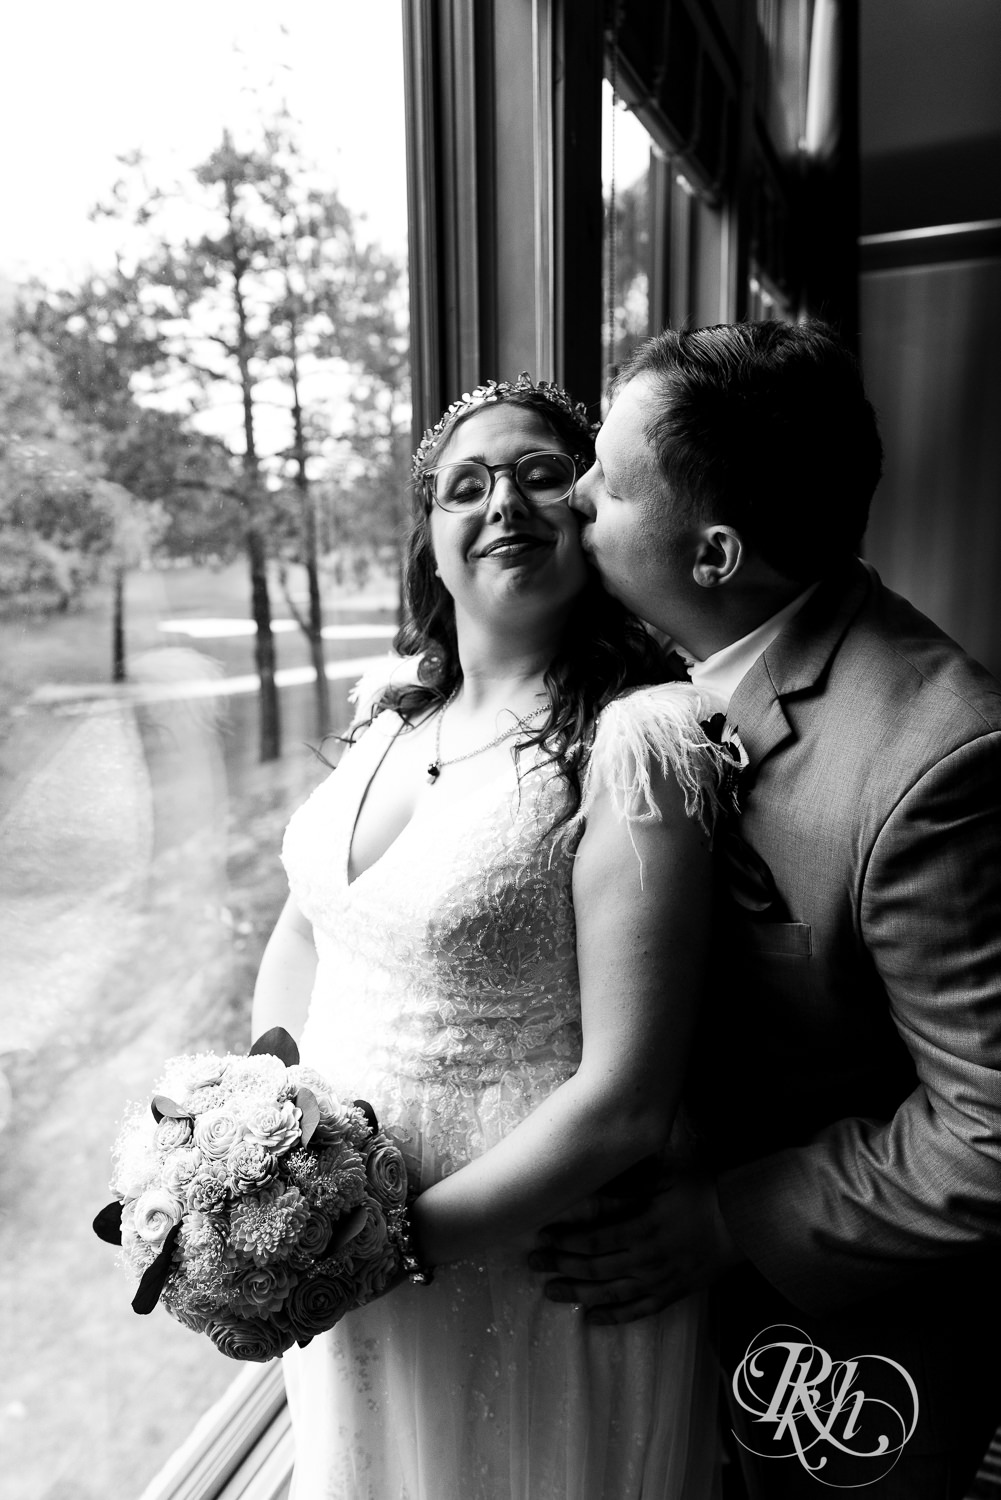 Bride and groom smile by the window on wedding day at Bunker Hills Event Center in Coon Rapids, Minnesota.